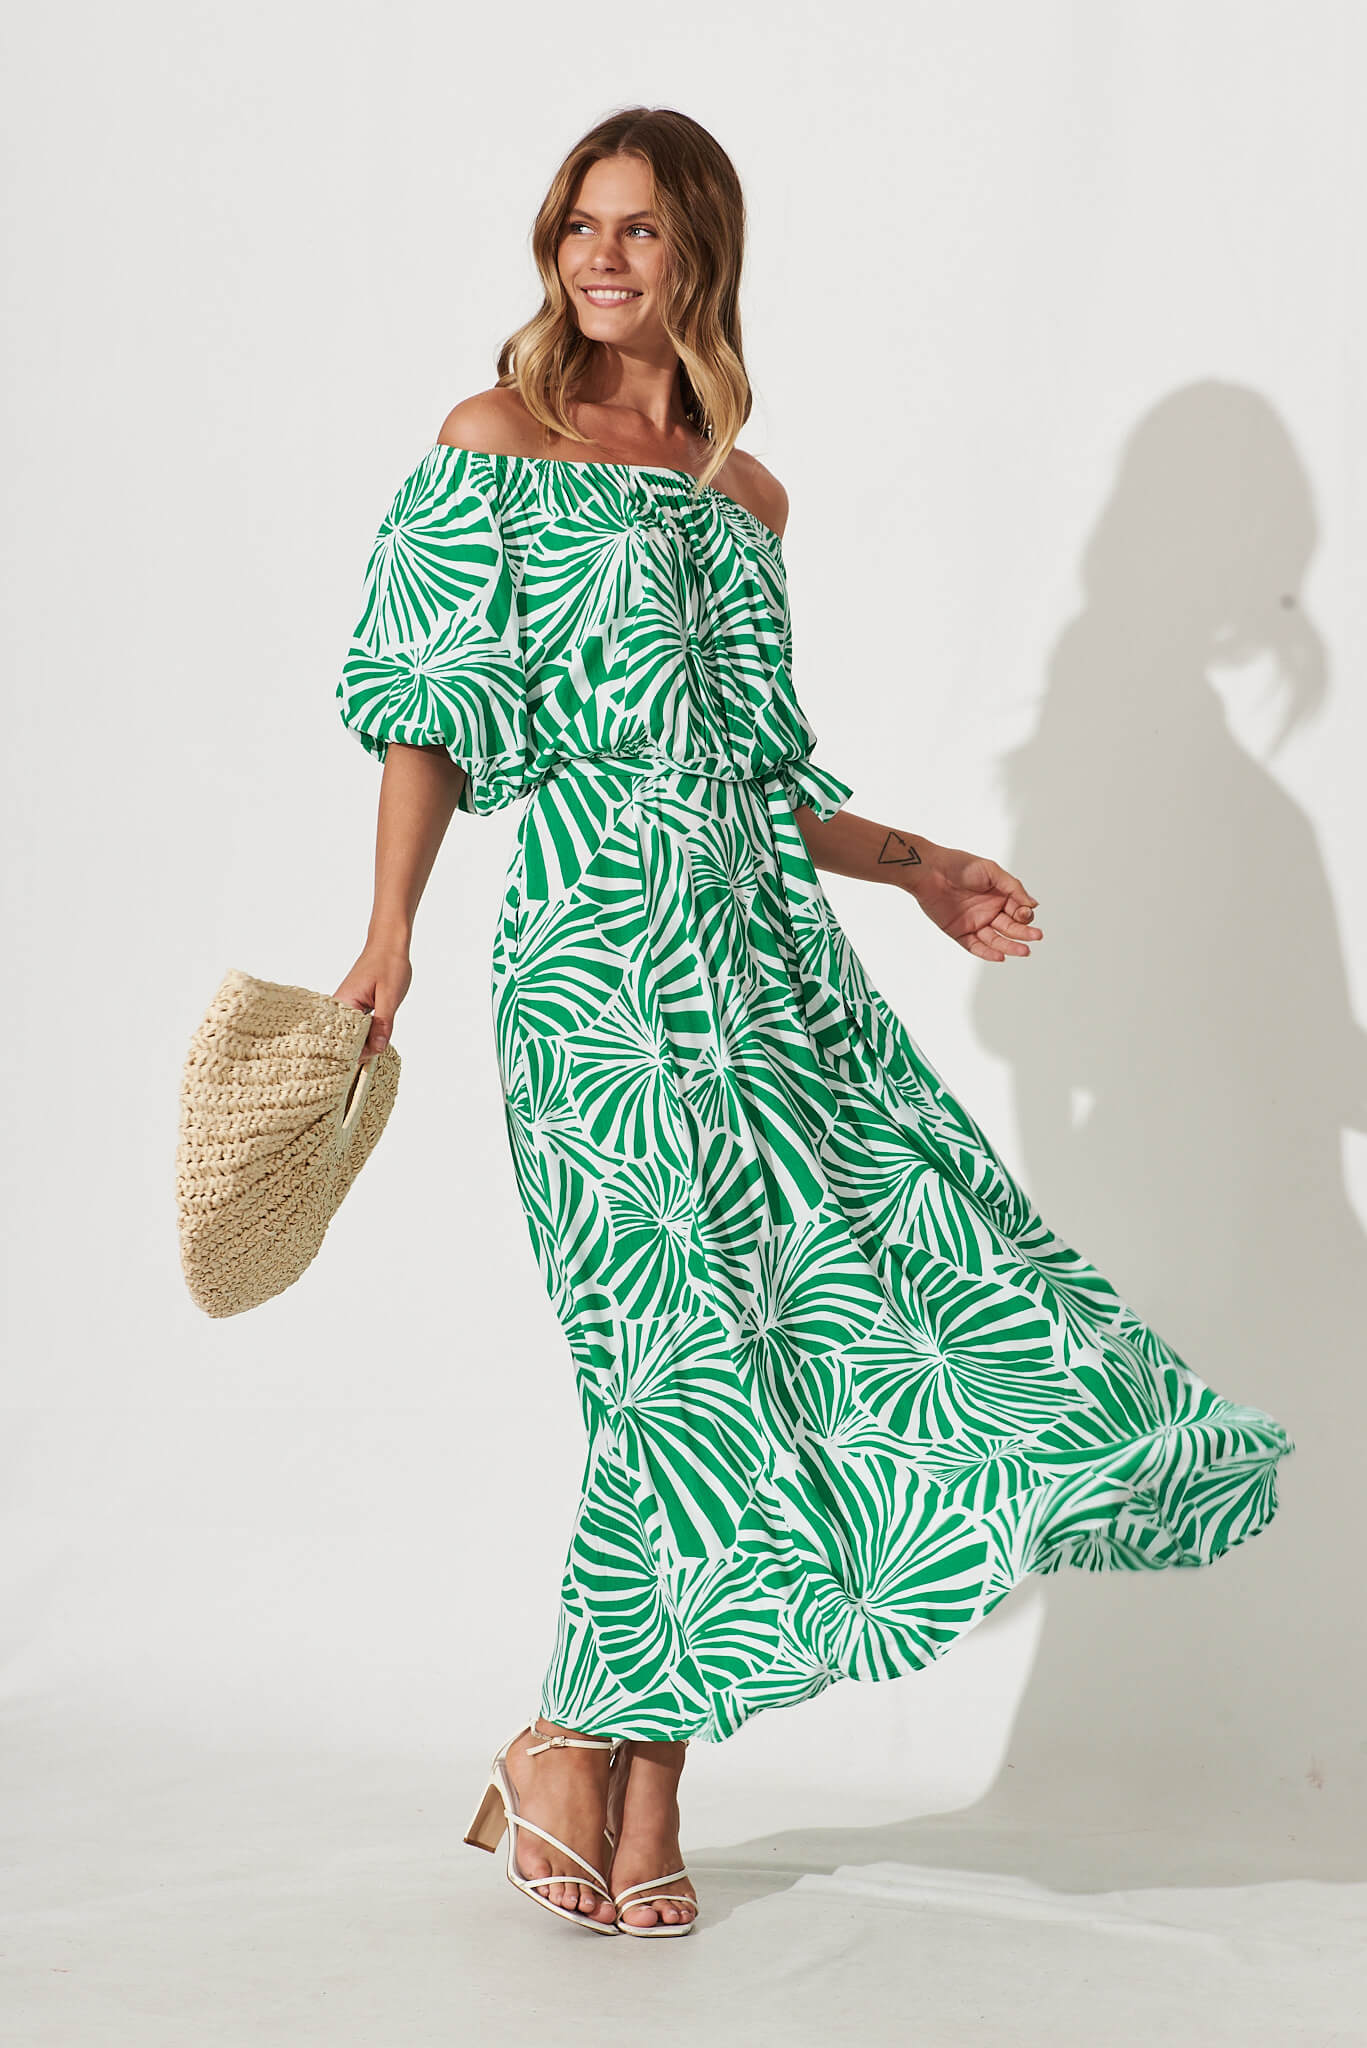 Raquelle Maxi Dress In Green And White Palm Print - full length